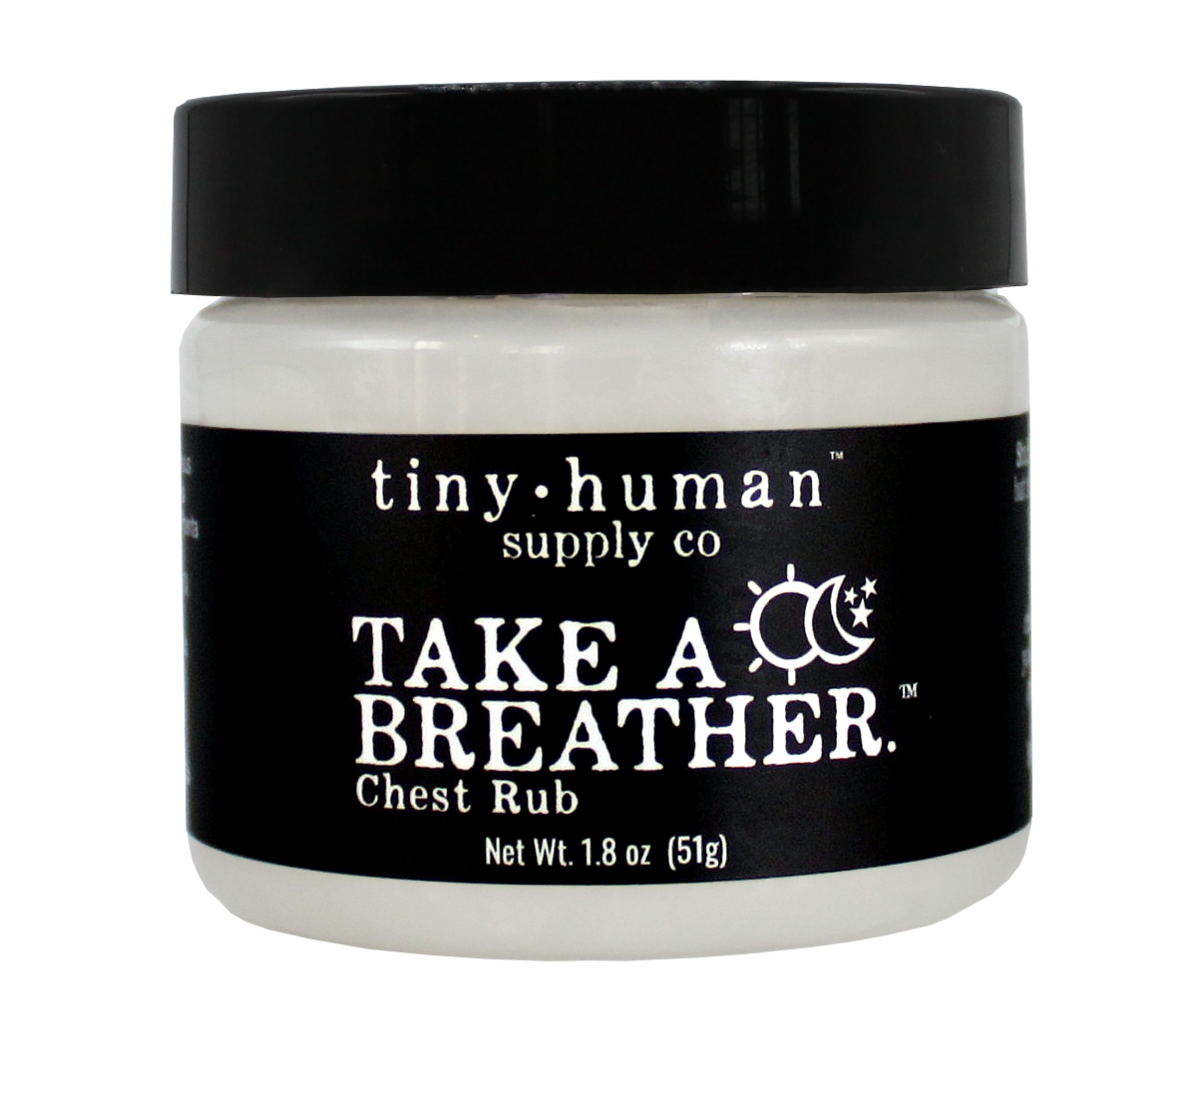 Take a Breather, Chest Rub by Tiny Human Supply Co